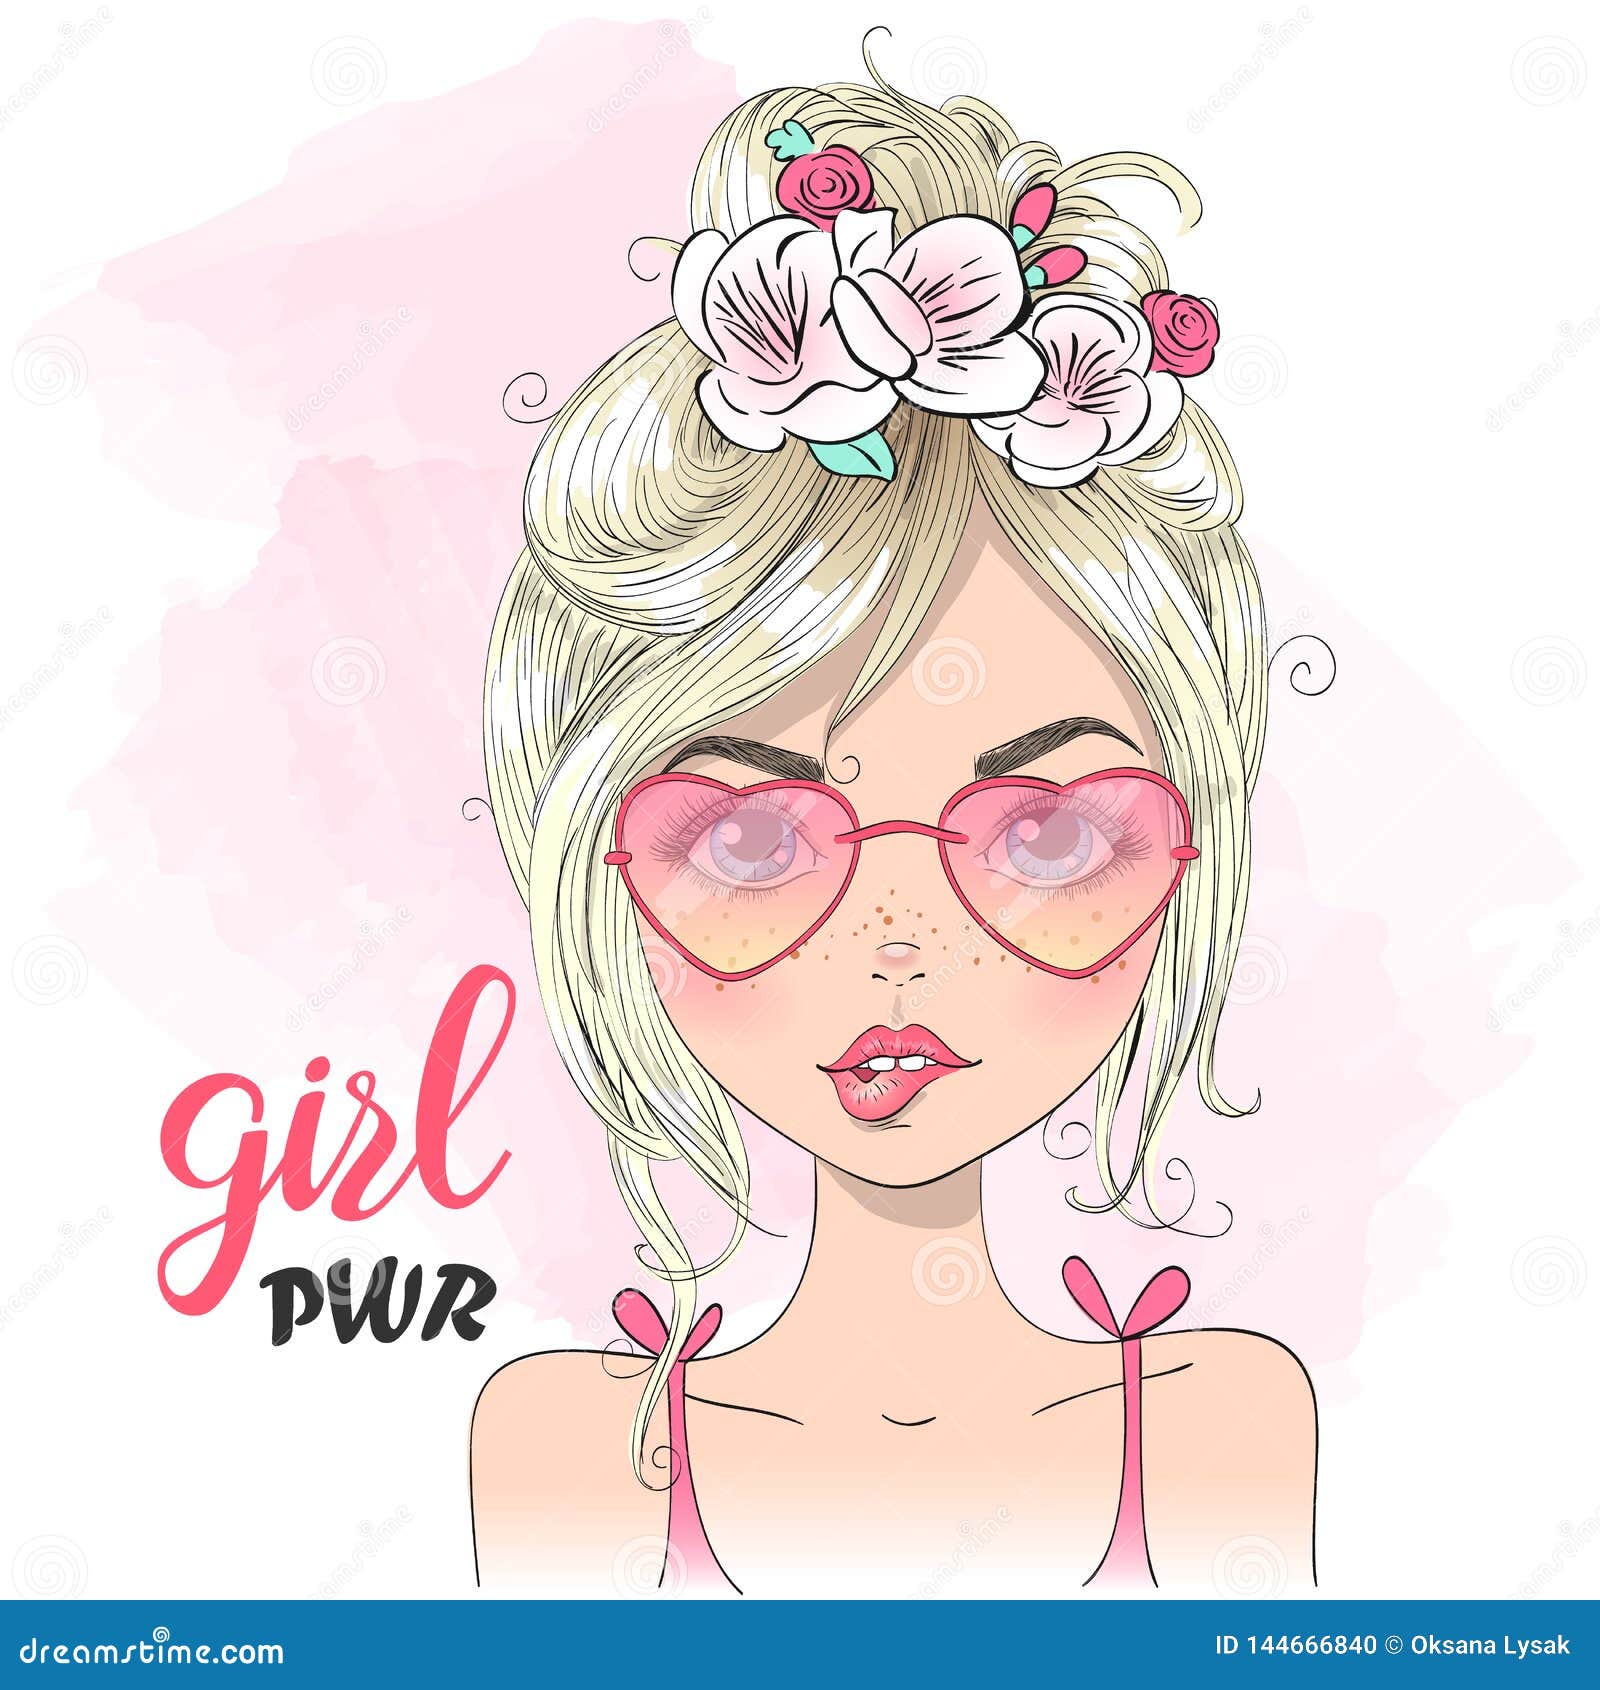 hand drawn beautiful cute cartoon girl lipss and background with inscription girl power.